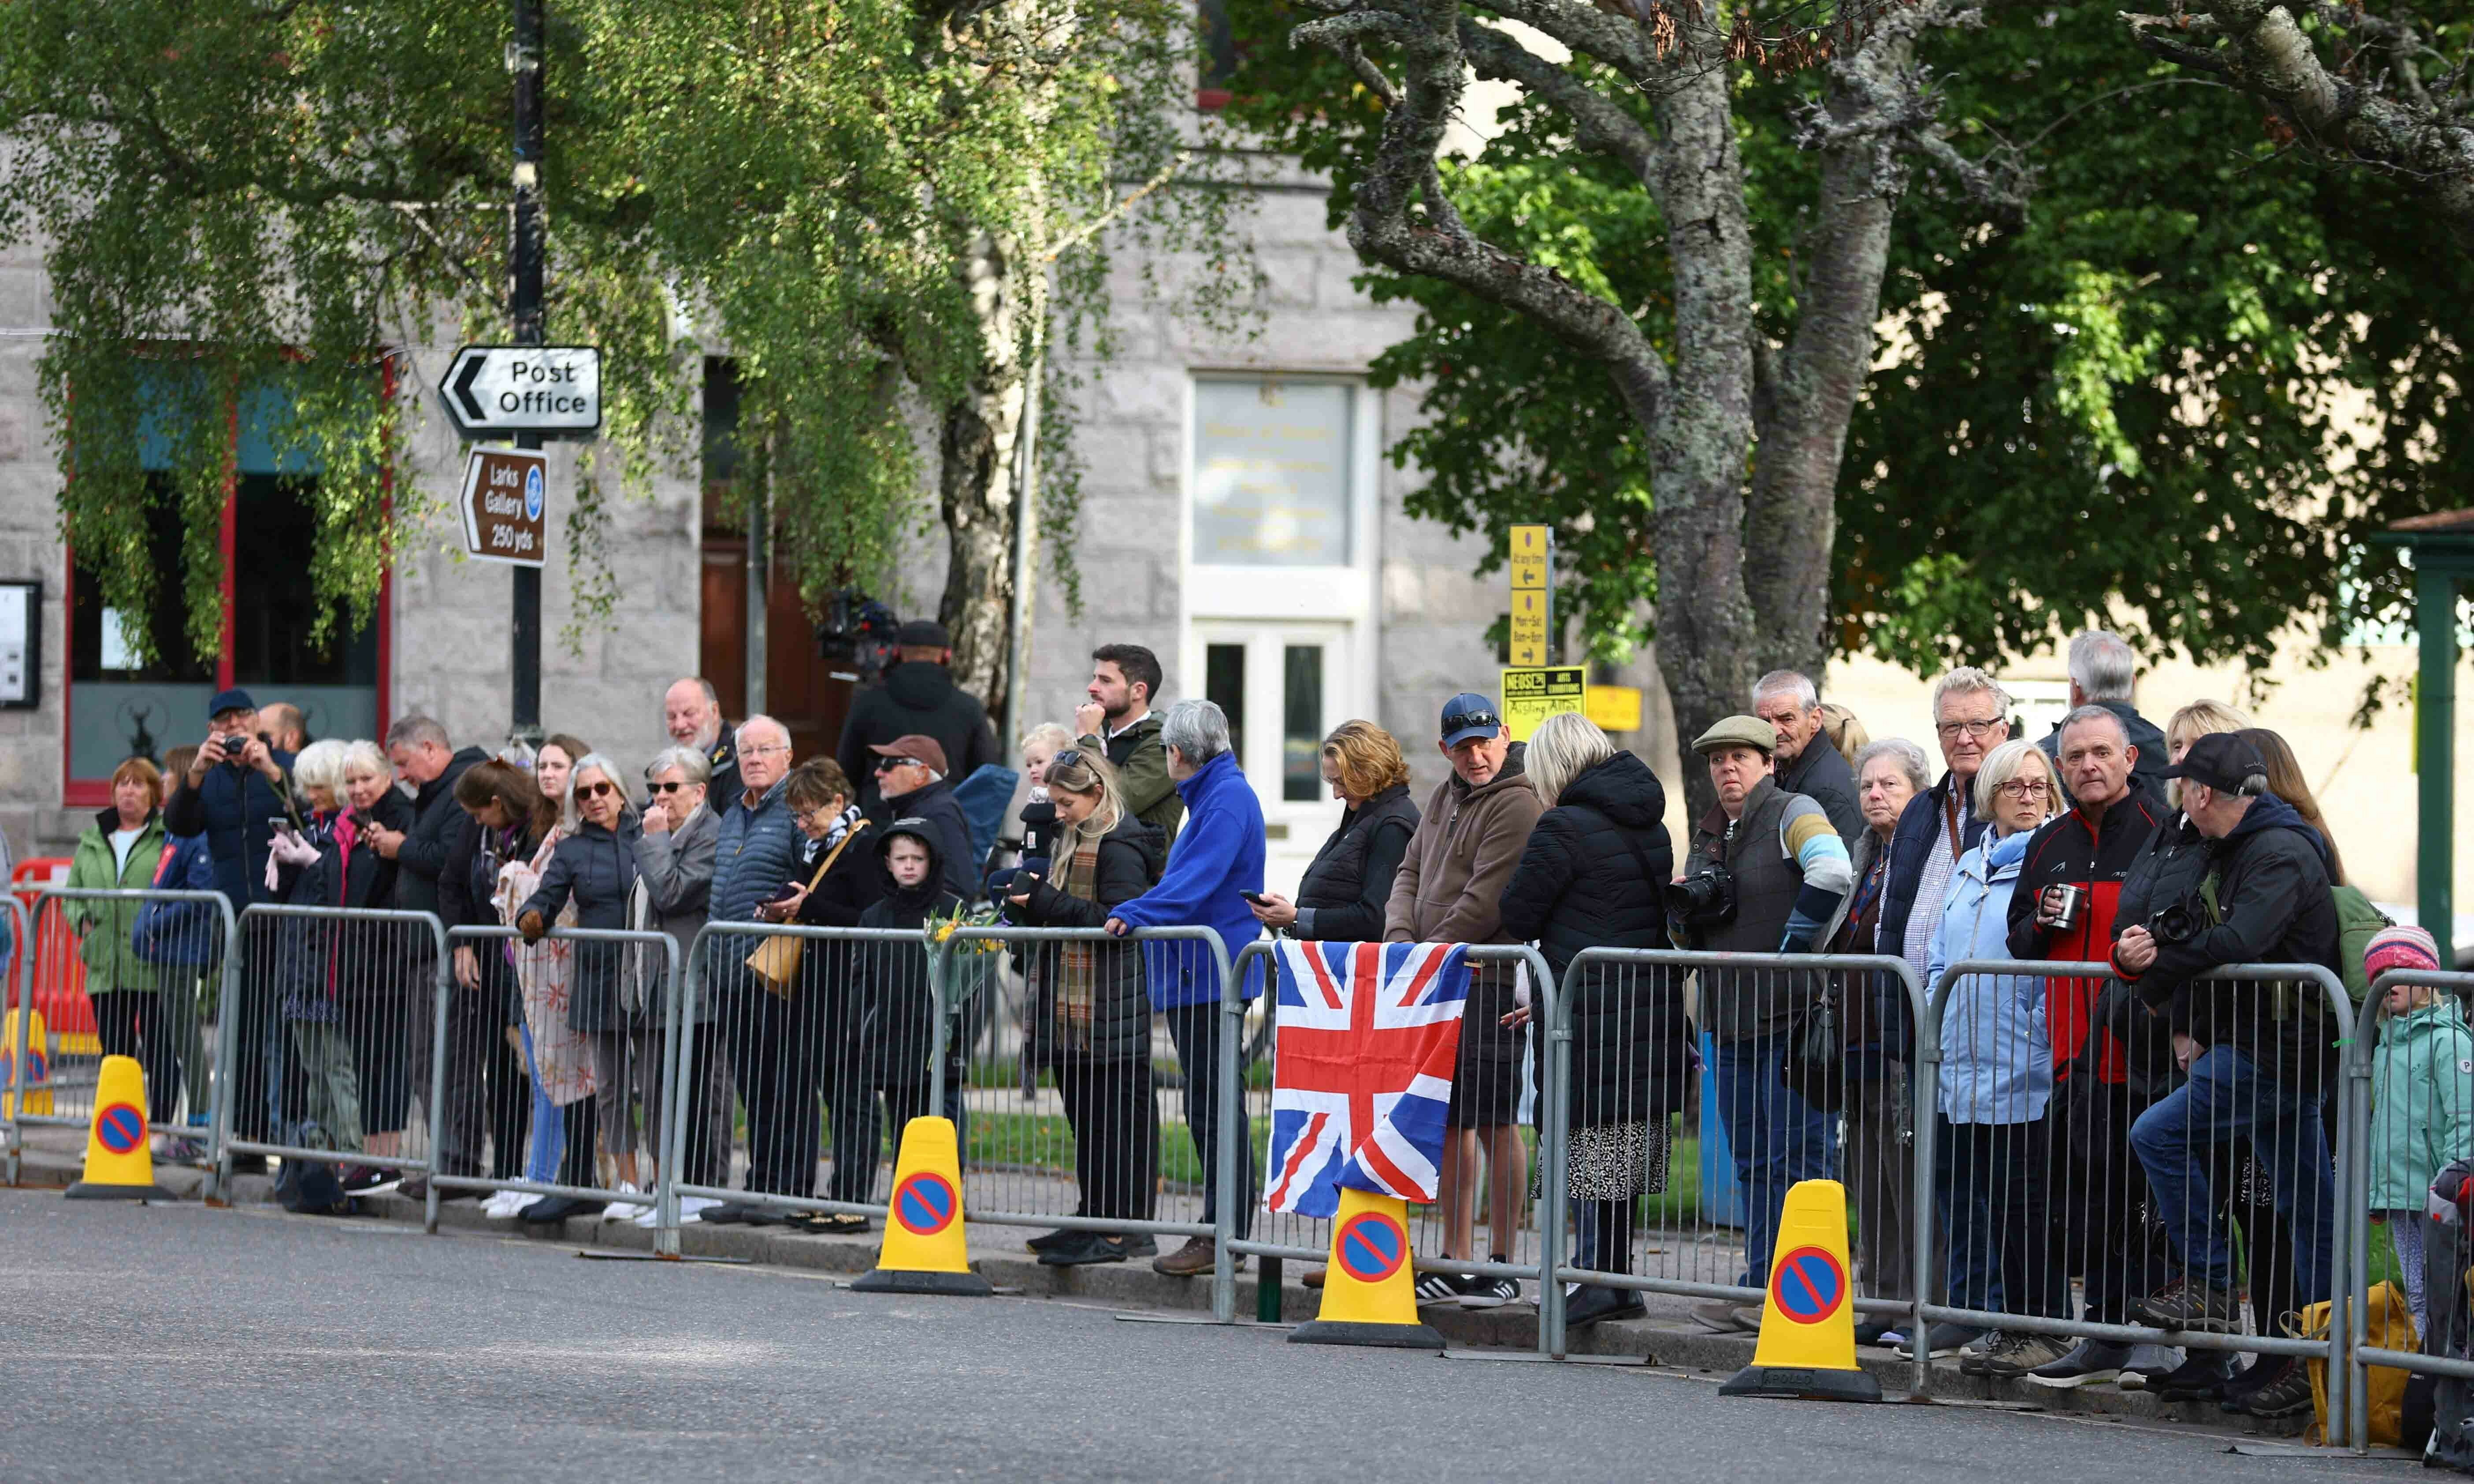 <p>People line the street waiting for the funeral cortage carrying Britain’s Queen Elizabeth in the village of Ballater, following the Queen’s passing, near Balmoral, Scotland on September 11. — Reuters</p>